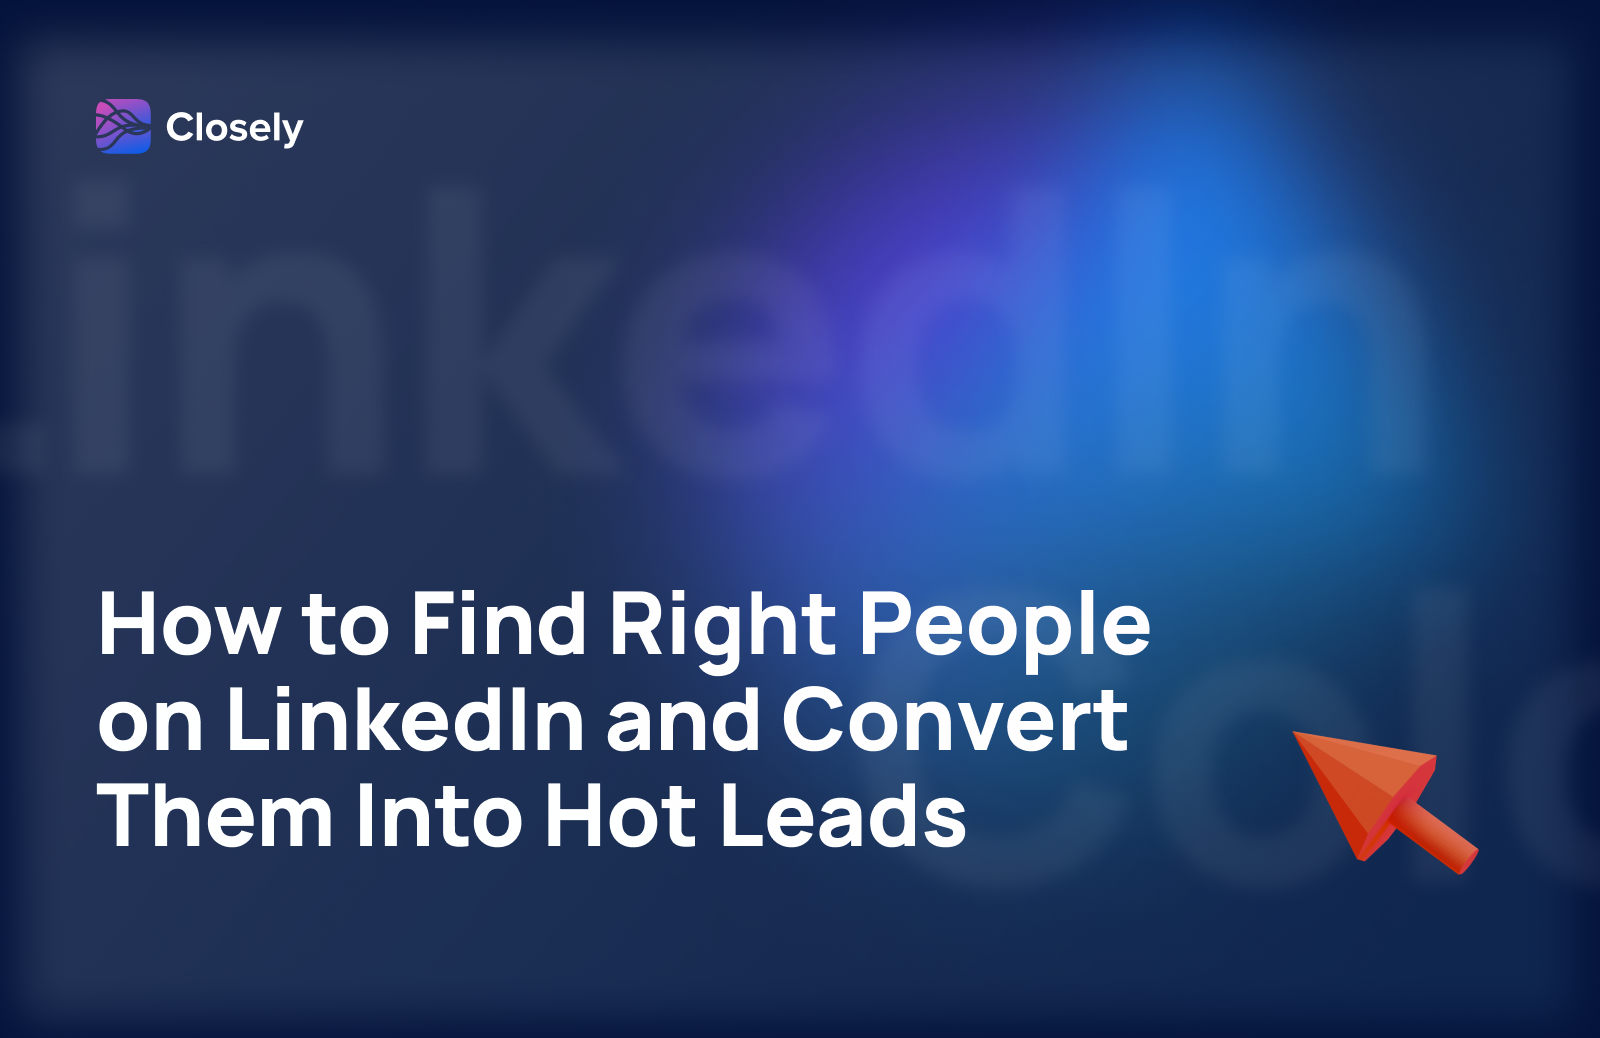 How to find right people on LinkedIn